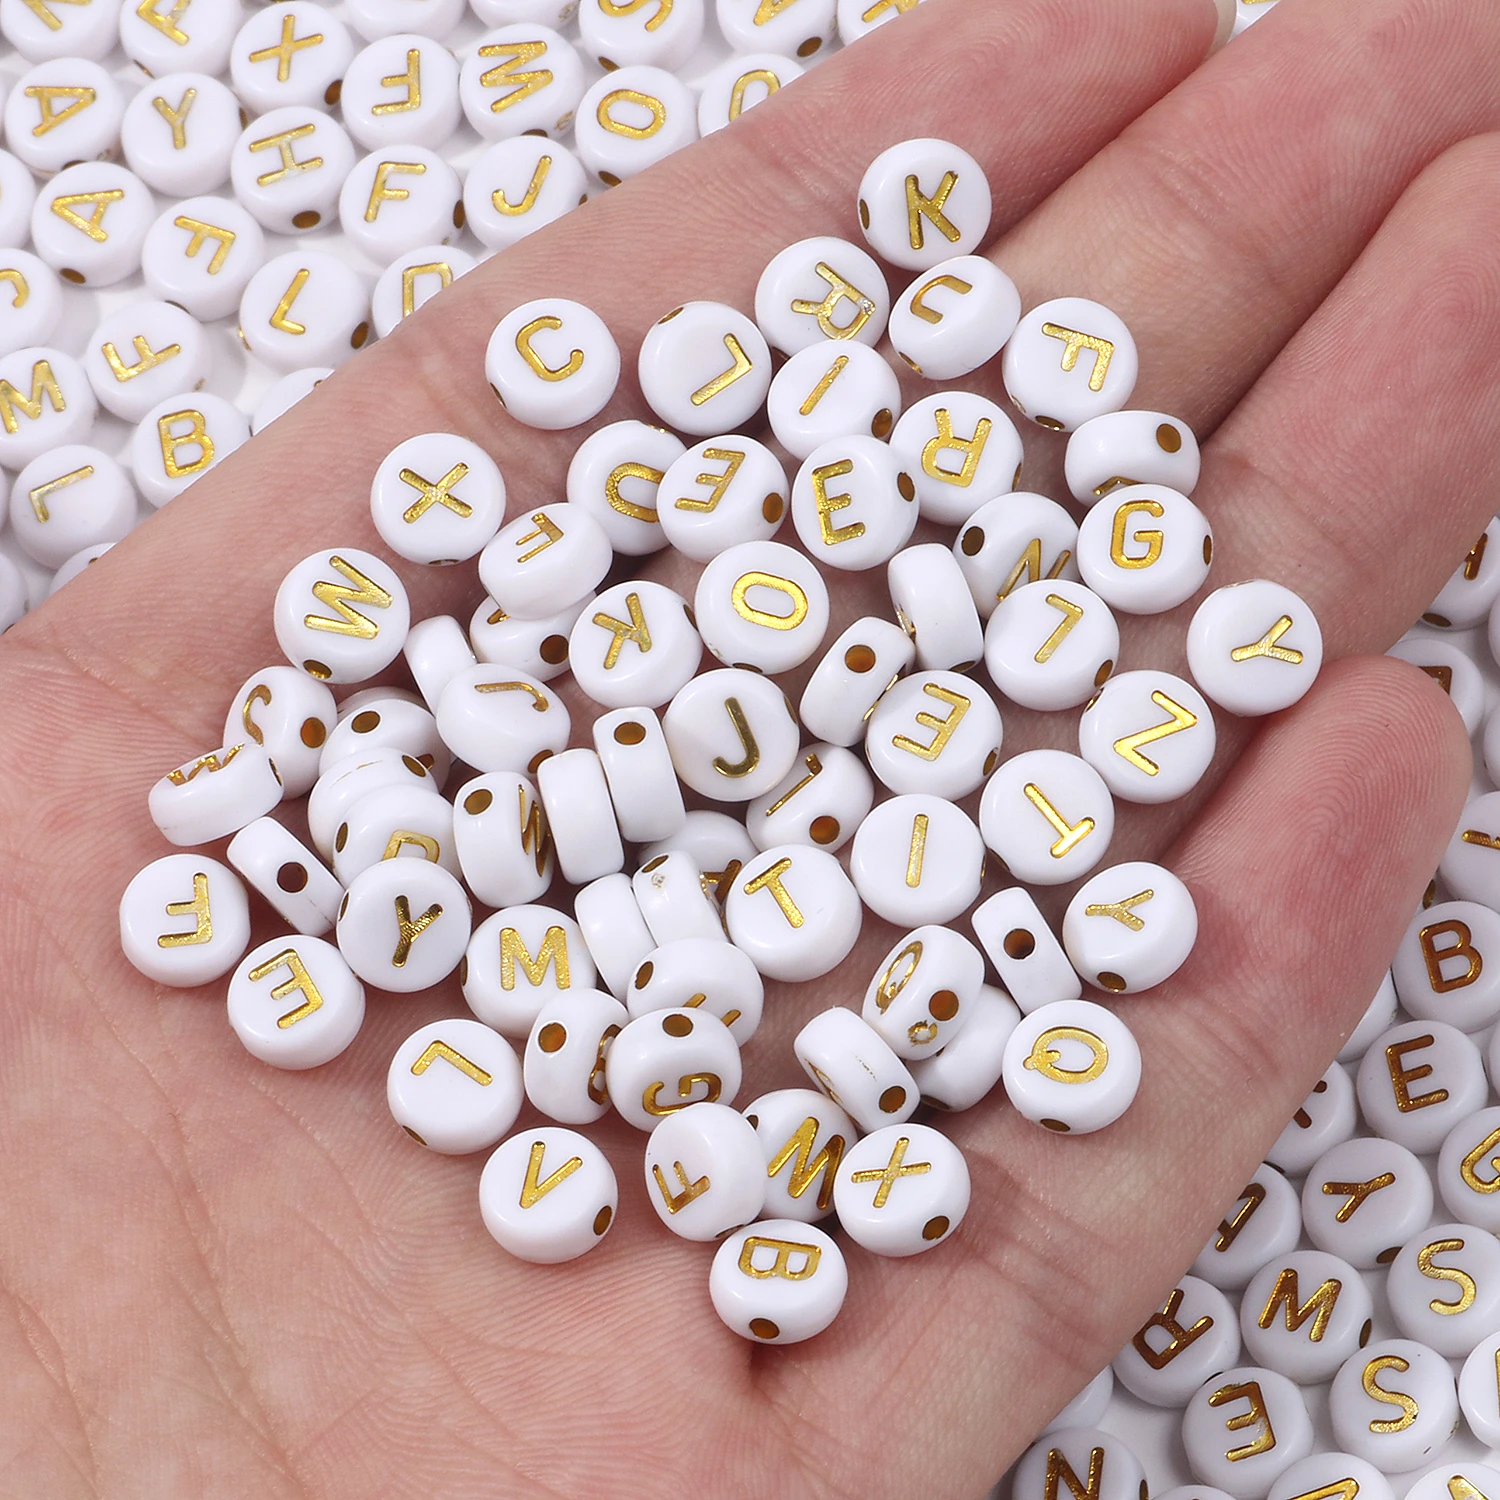 200/300/500PCs Mixed white and gold Acrylic Alphabet/Letter Round Beads For Jewelry Making diy Handmade Bracelet Necklace 7x4mm